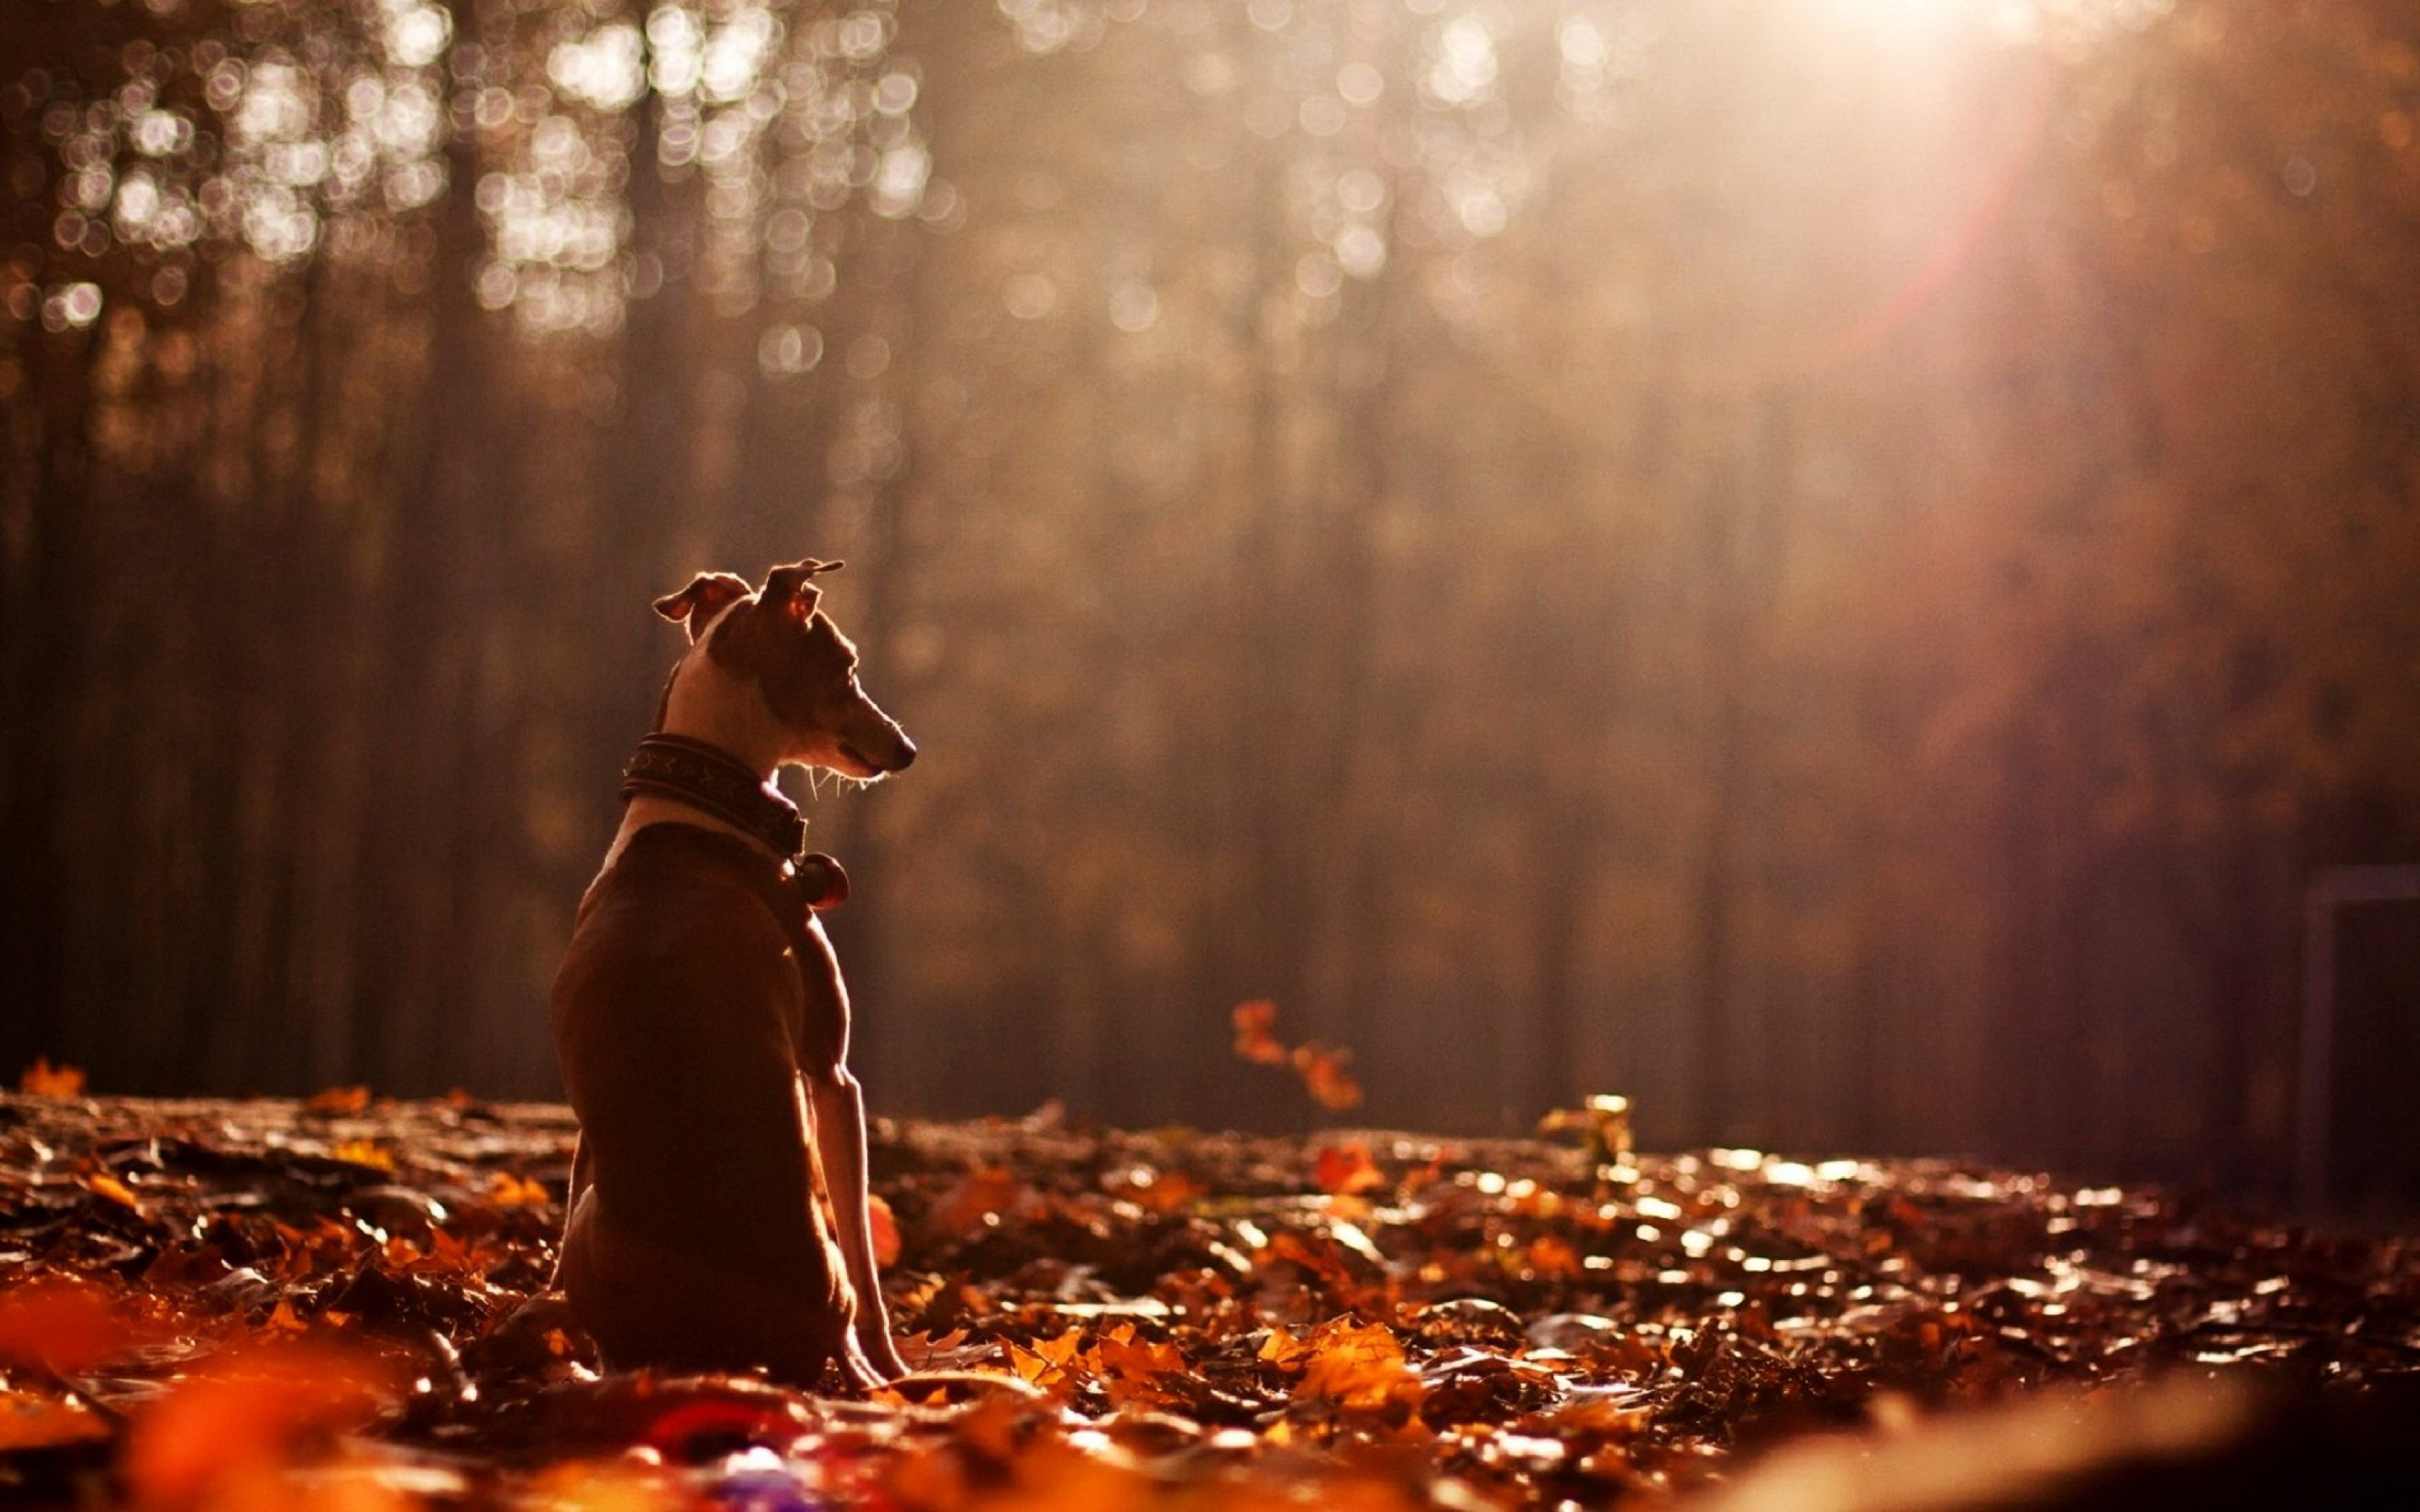 Cute dog animal alone forest autumn wallpaper | 3840x2400 | 680566 ...